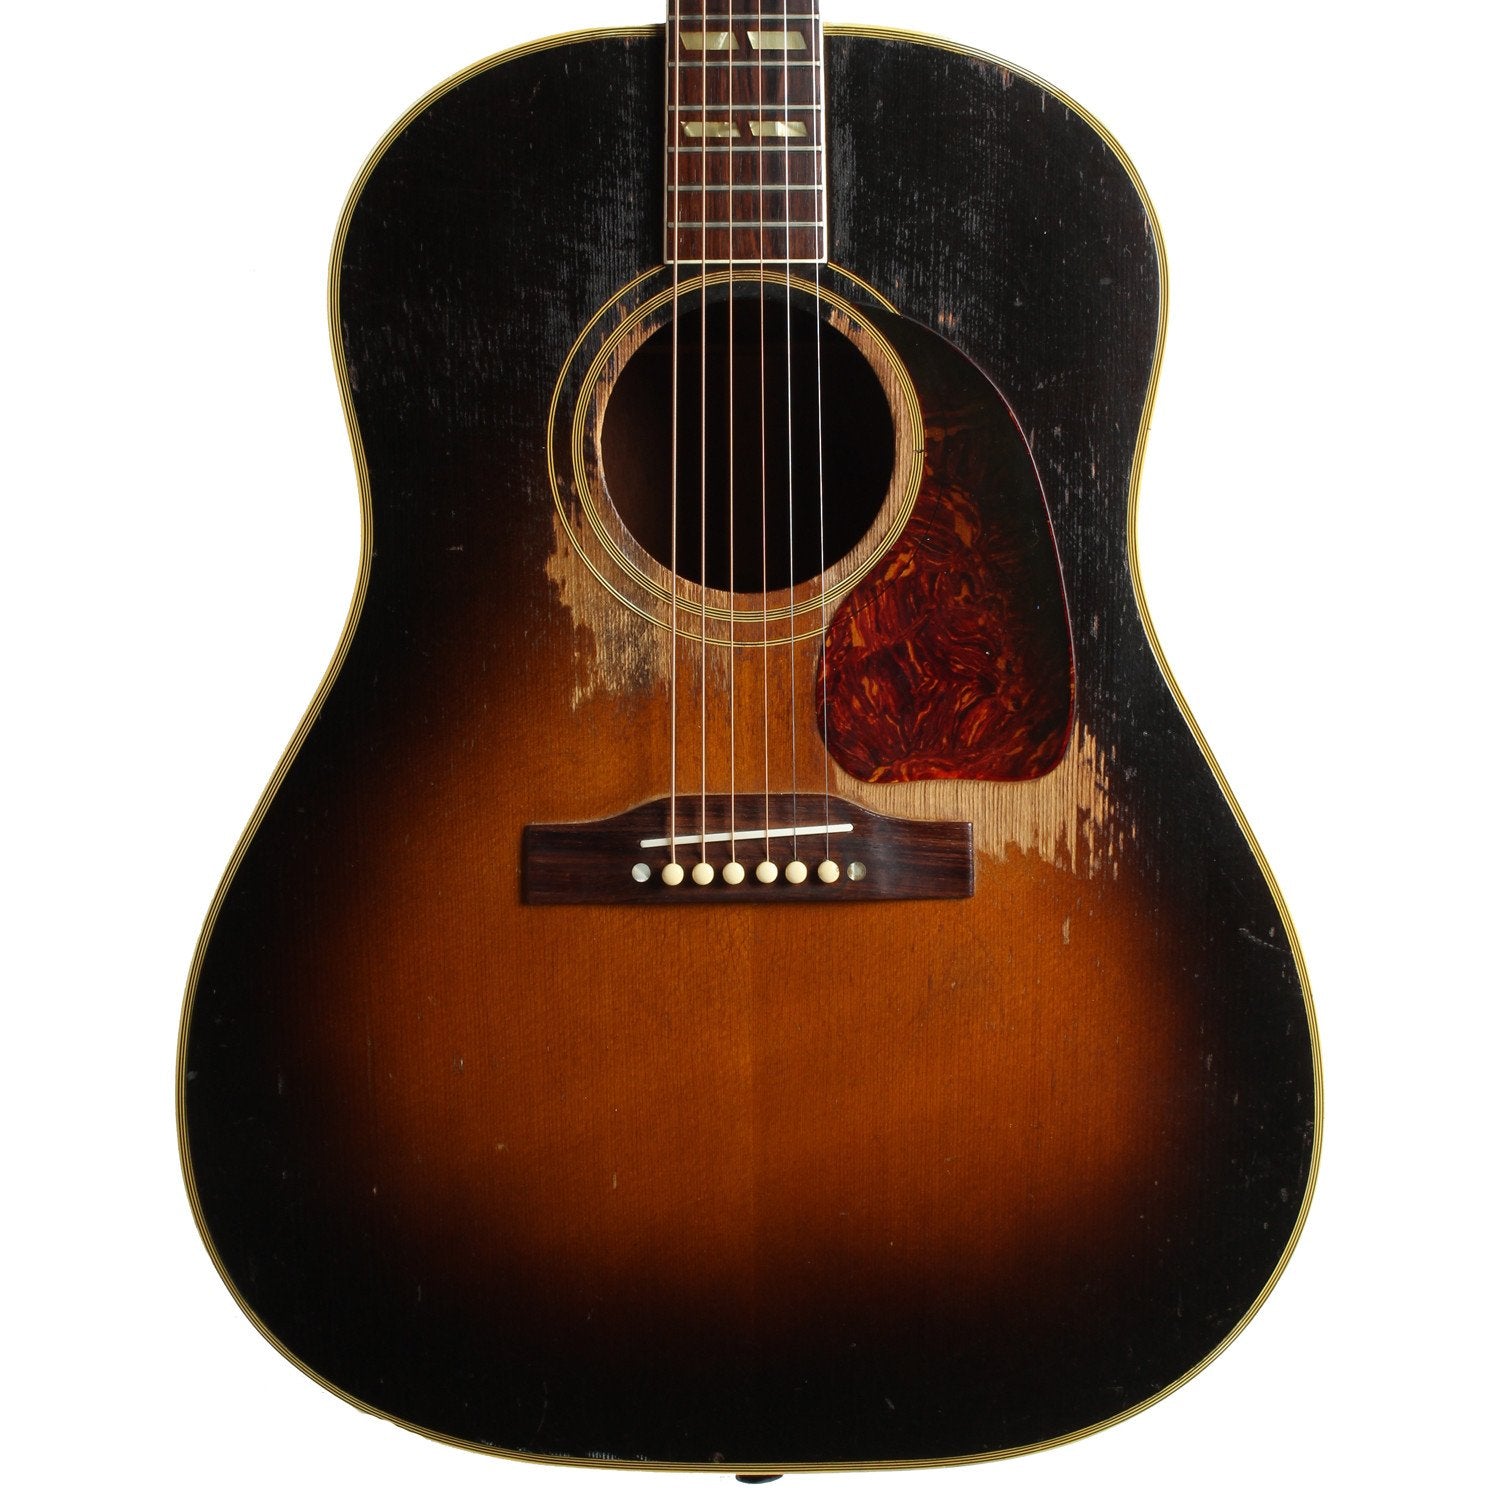 Previously Owned Acoustic Guitars